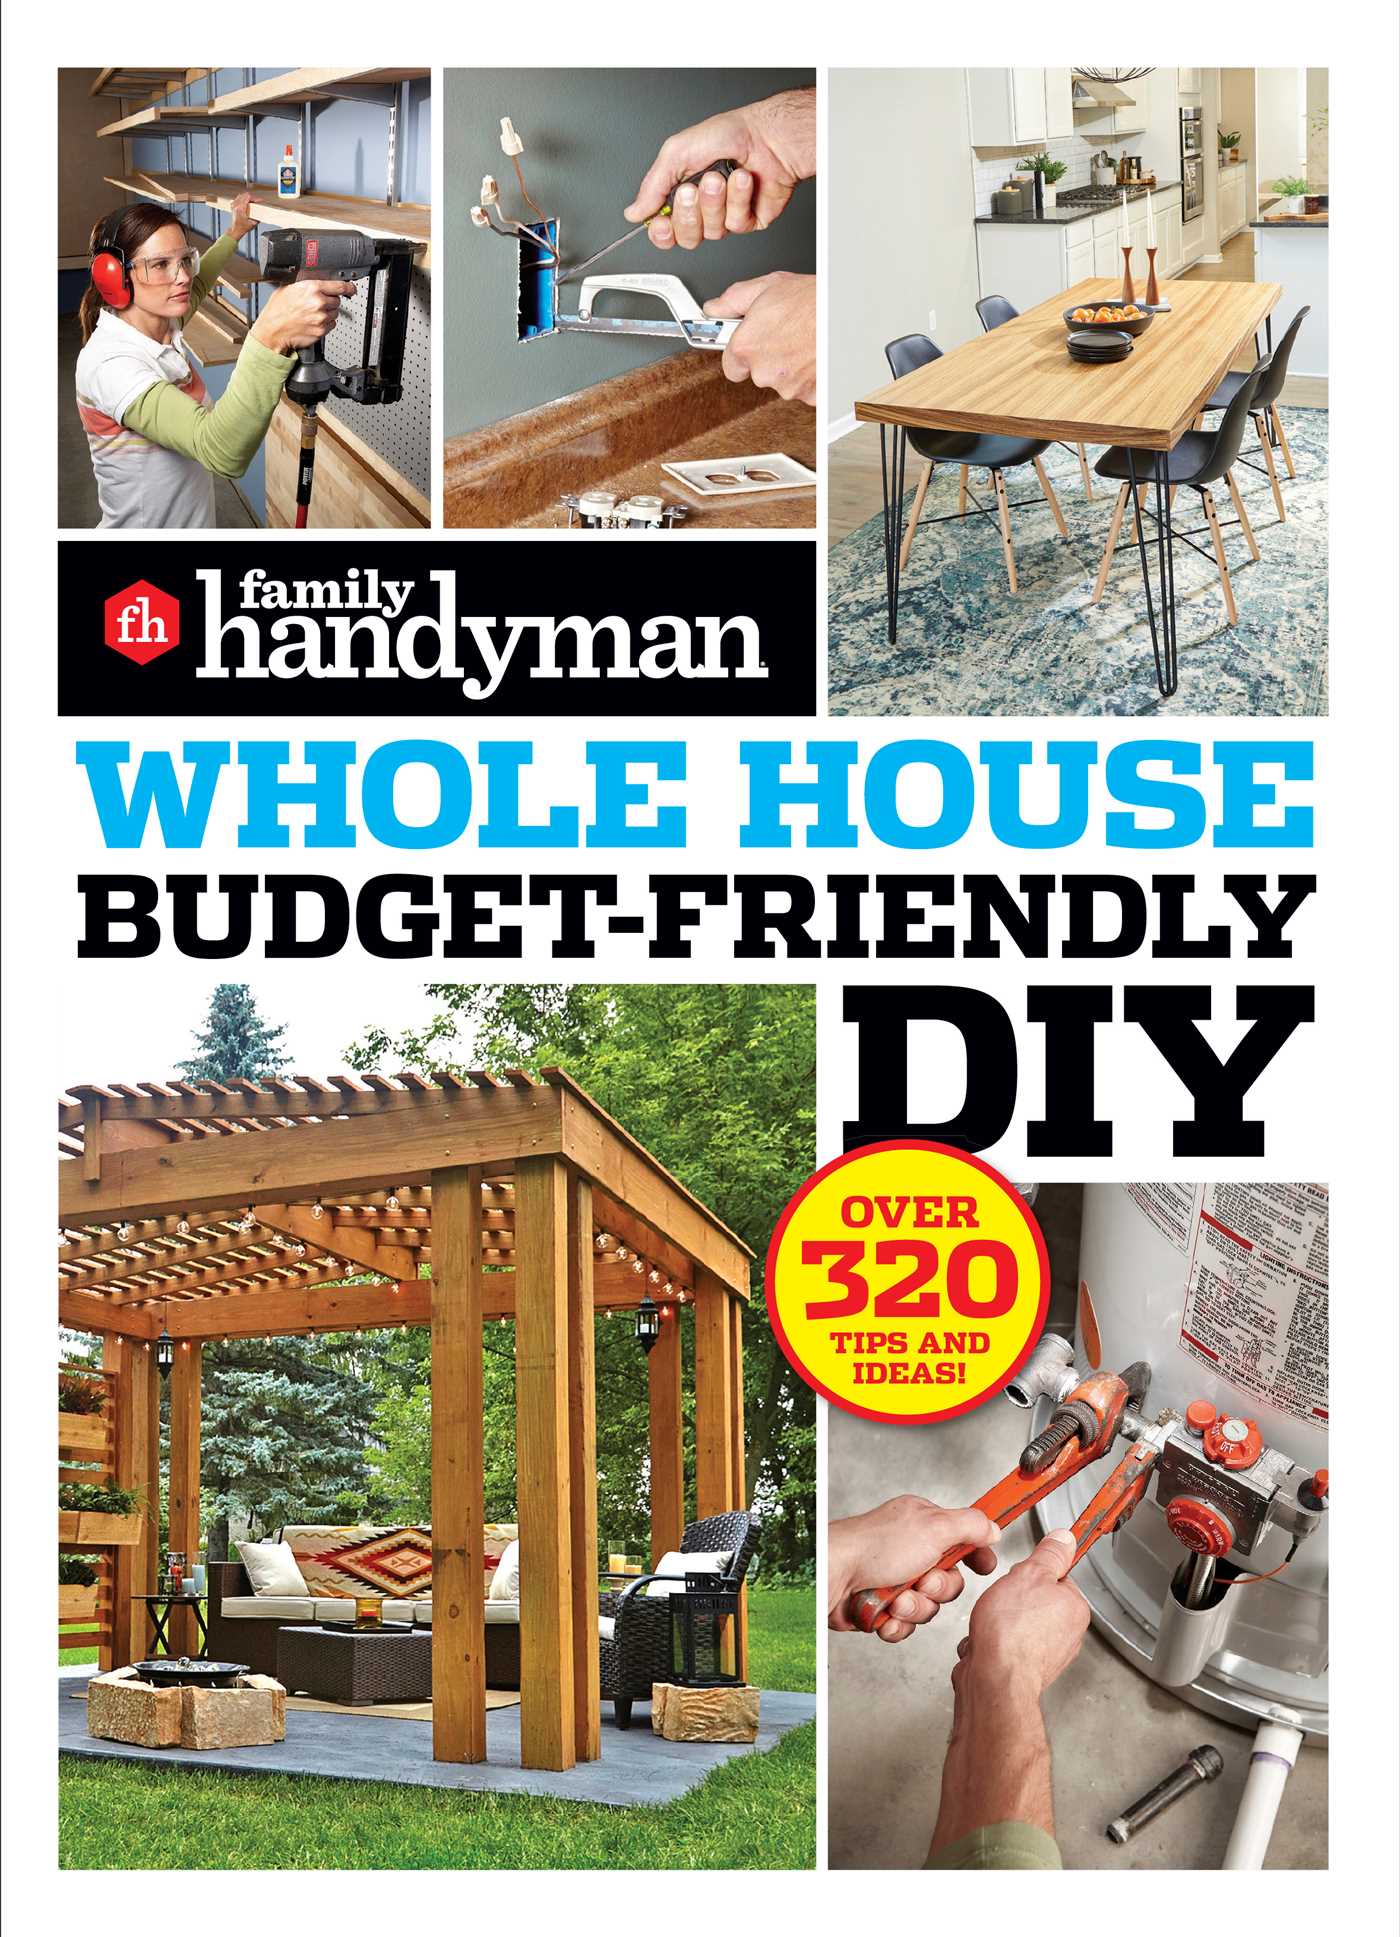 Family Handyman Whole House Budget Friendly DIY : Save Money, Save Time, Slash Household Bills. It's Easy with Help from the Pros. | 